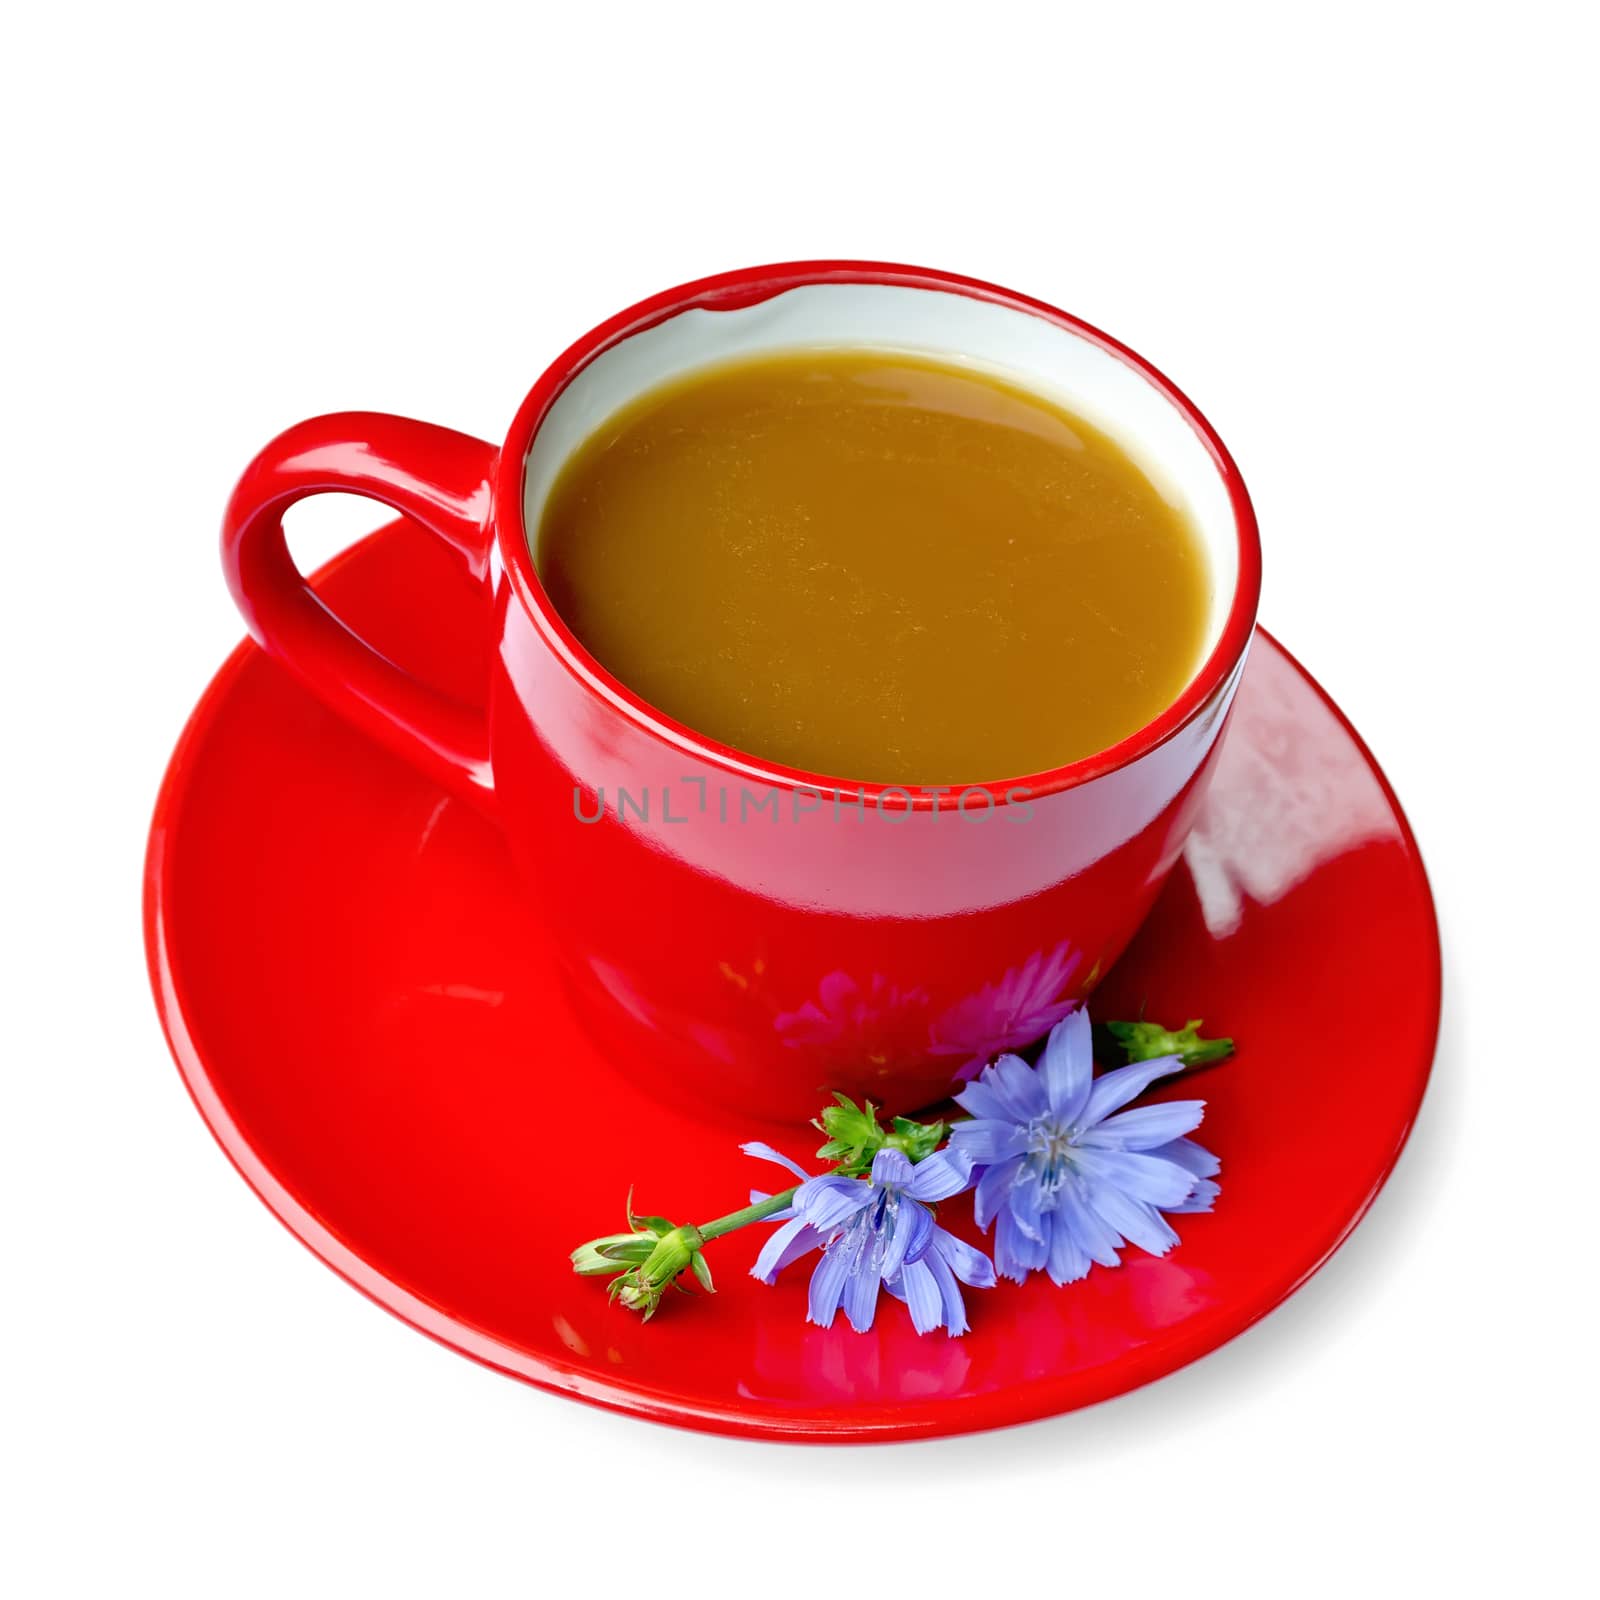 Chicory drink in red cup on saucer by rezkrr